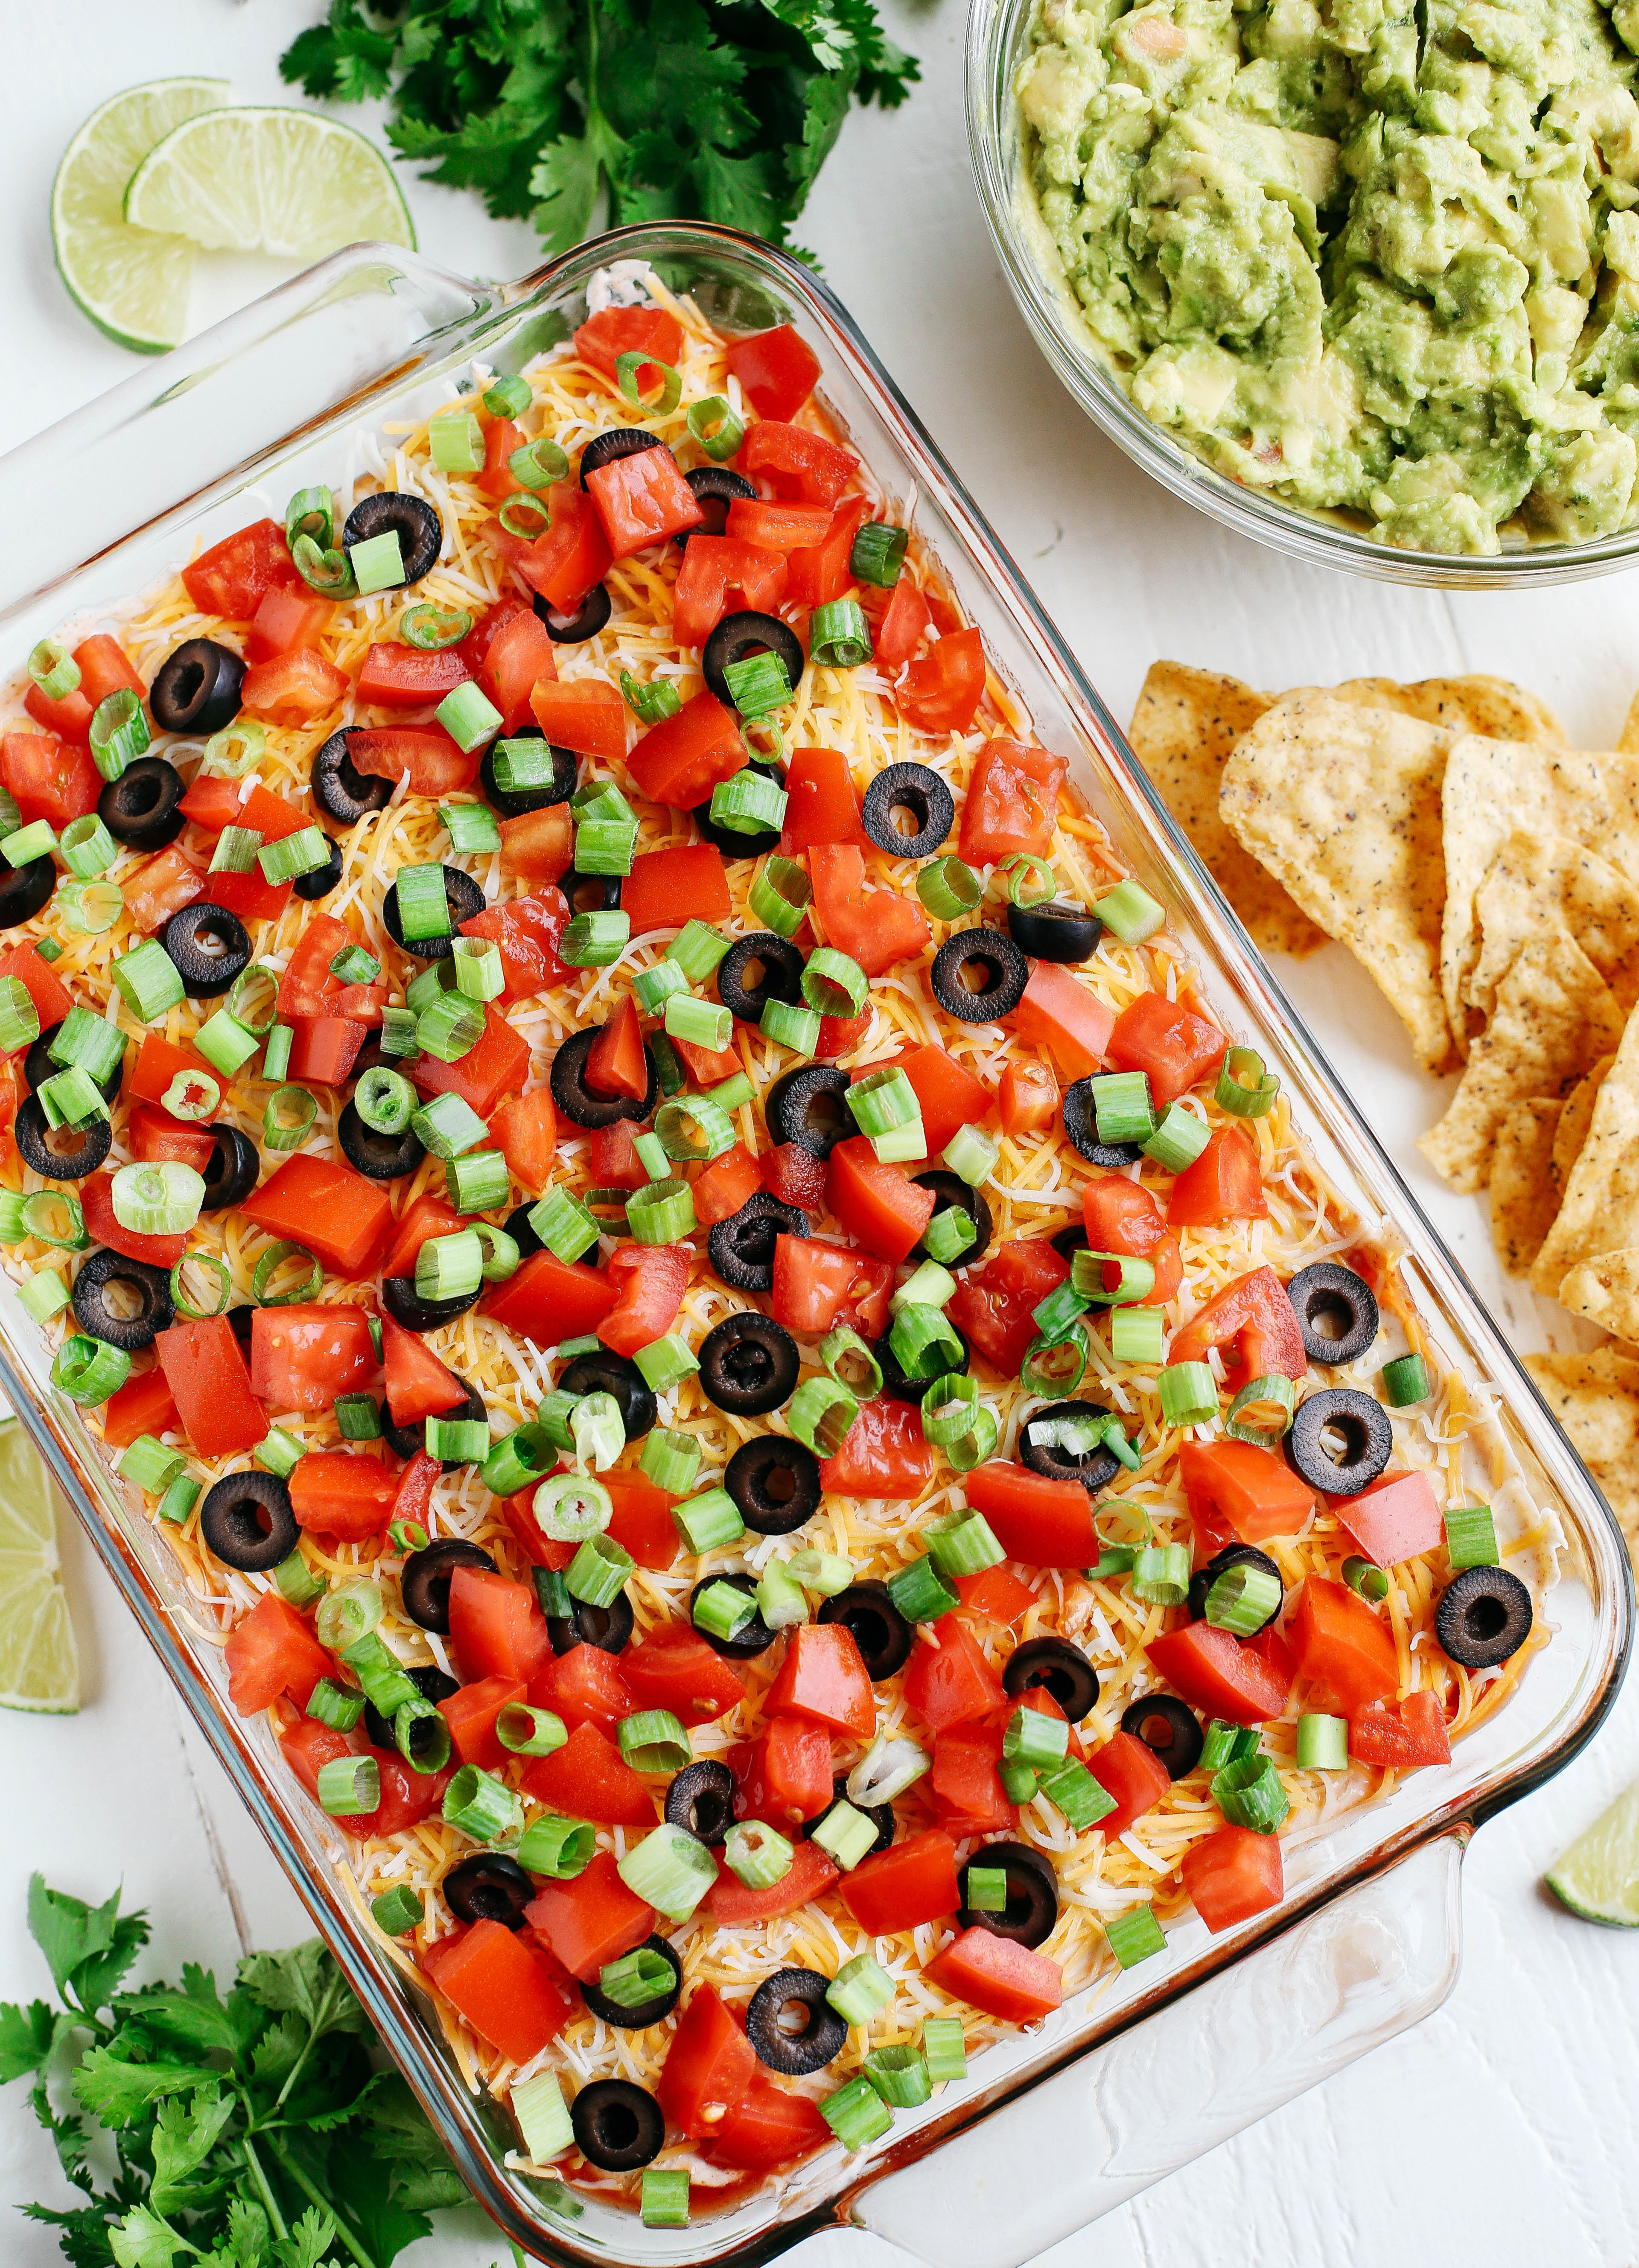 Healthier 7 Layer Spicy Taco Dip made with Greek yogurt, hummus, fresh guacamole, chunky salsa, homemade taco seasoning and all the fun toppings!  Super easy to make and always a crowdpleaser!